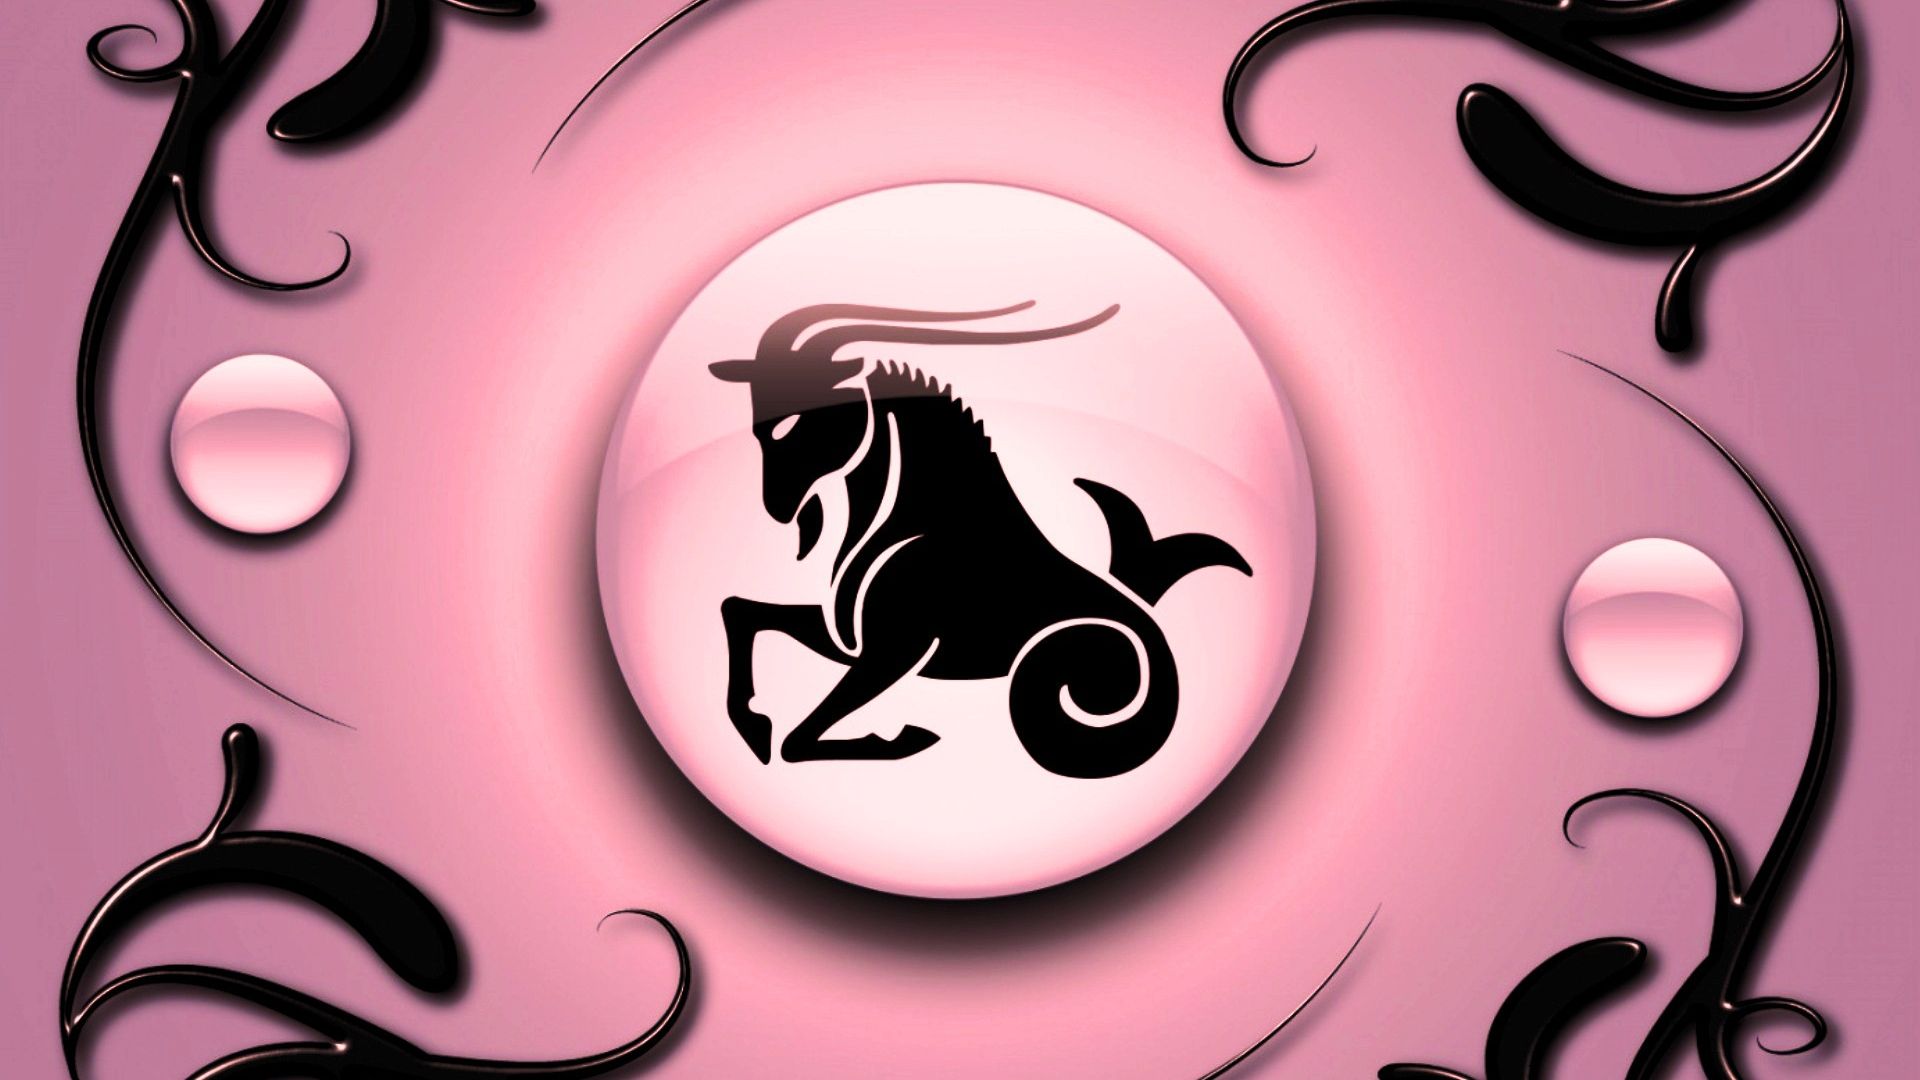 Capricorn on a pink background with black ornament Desktop wallpaper 1280x800